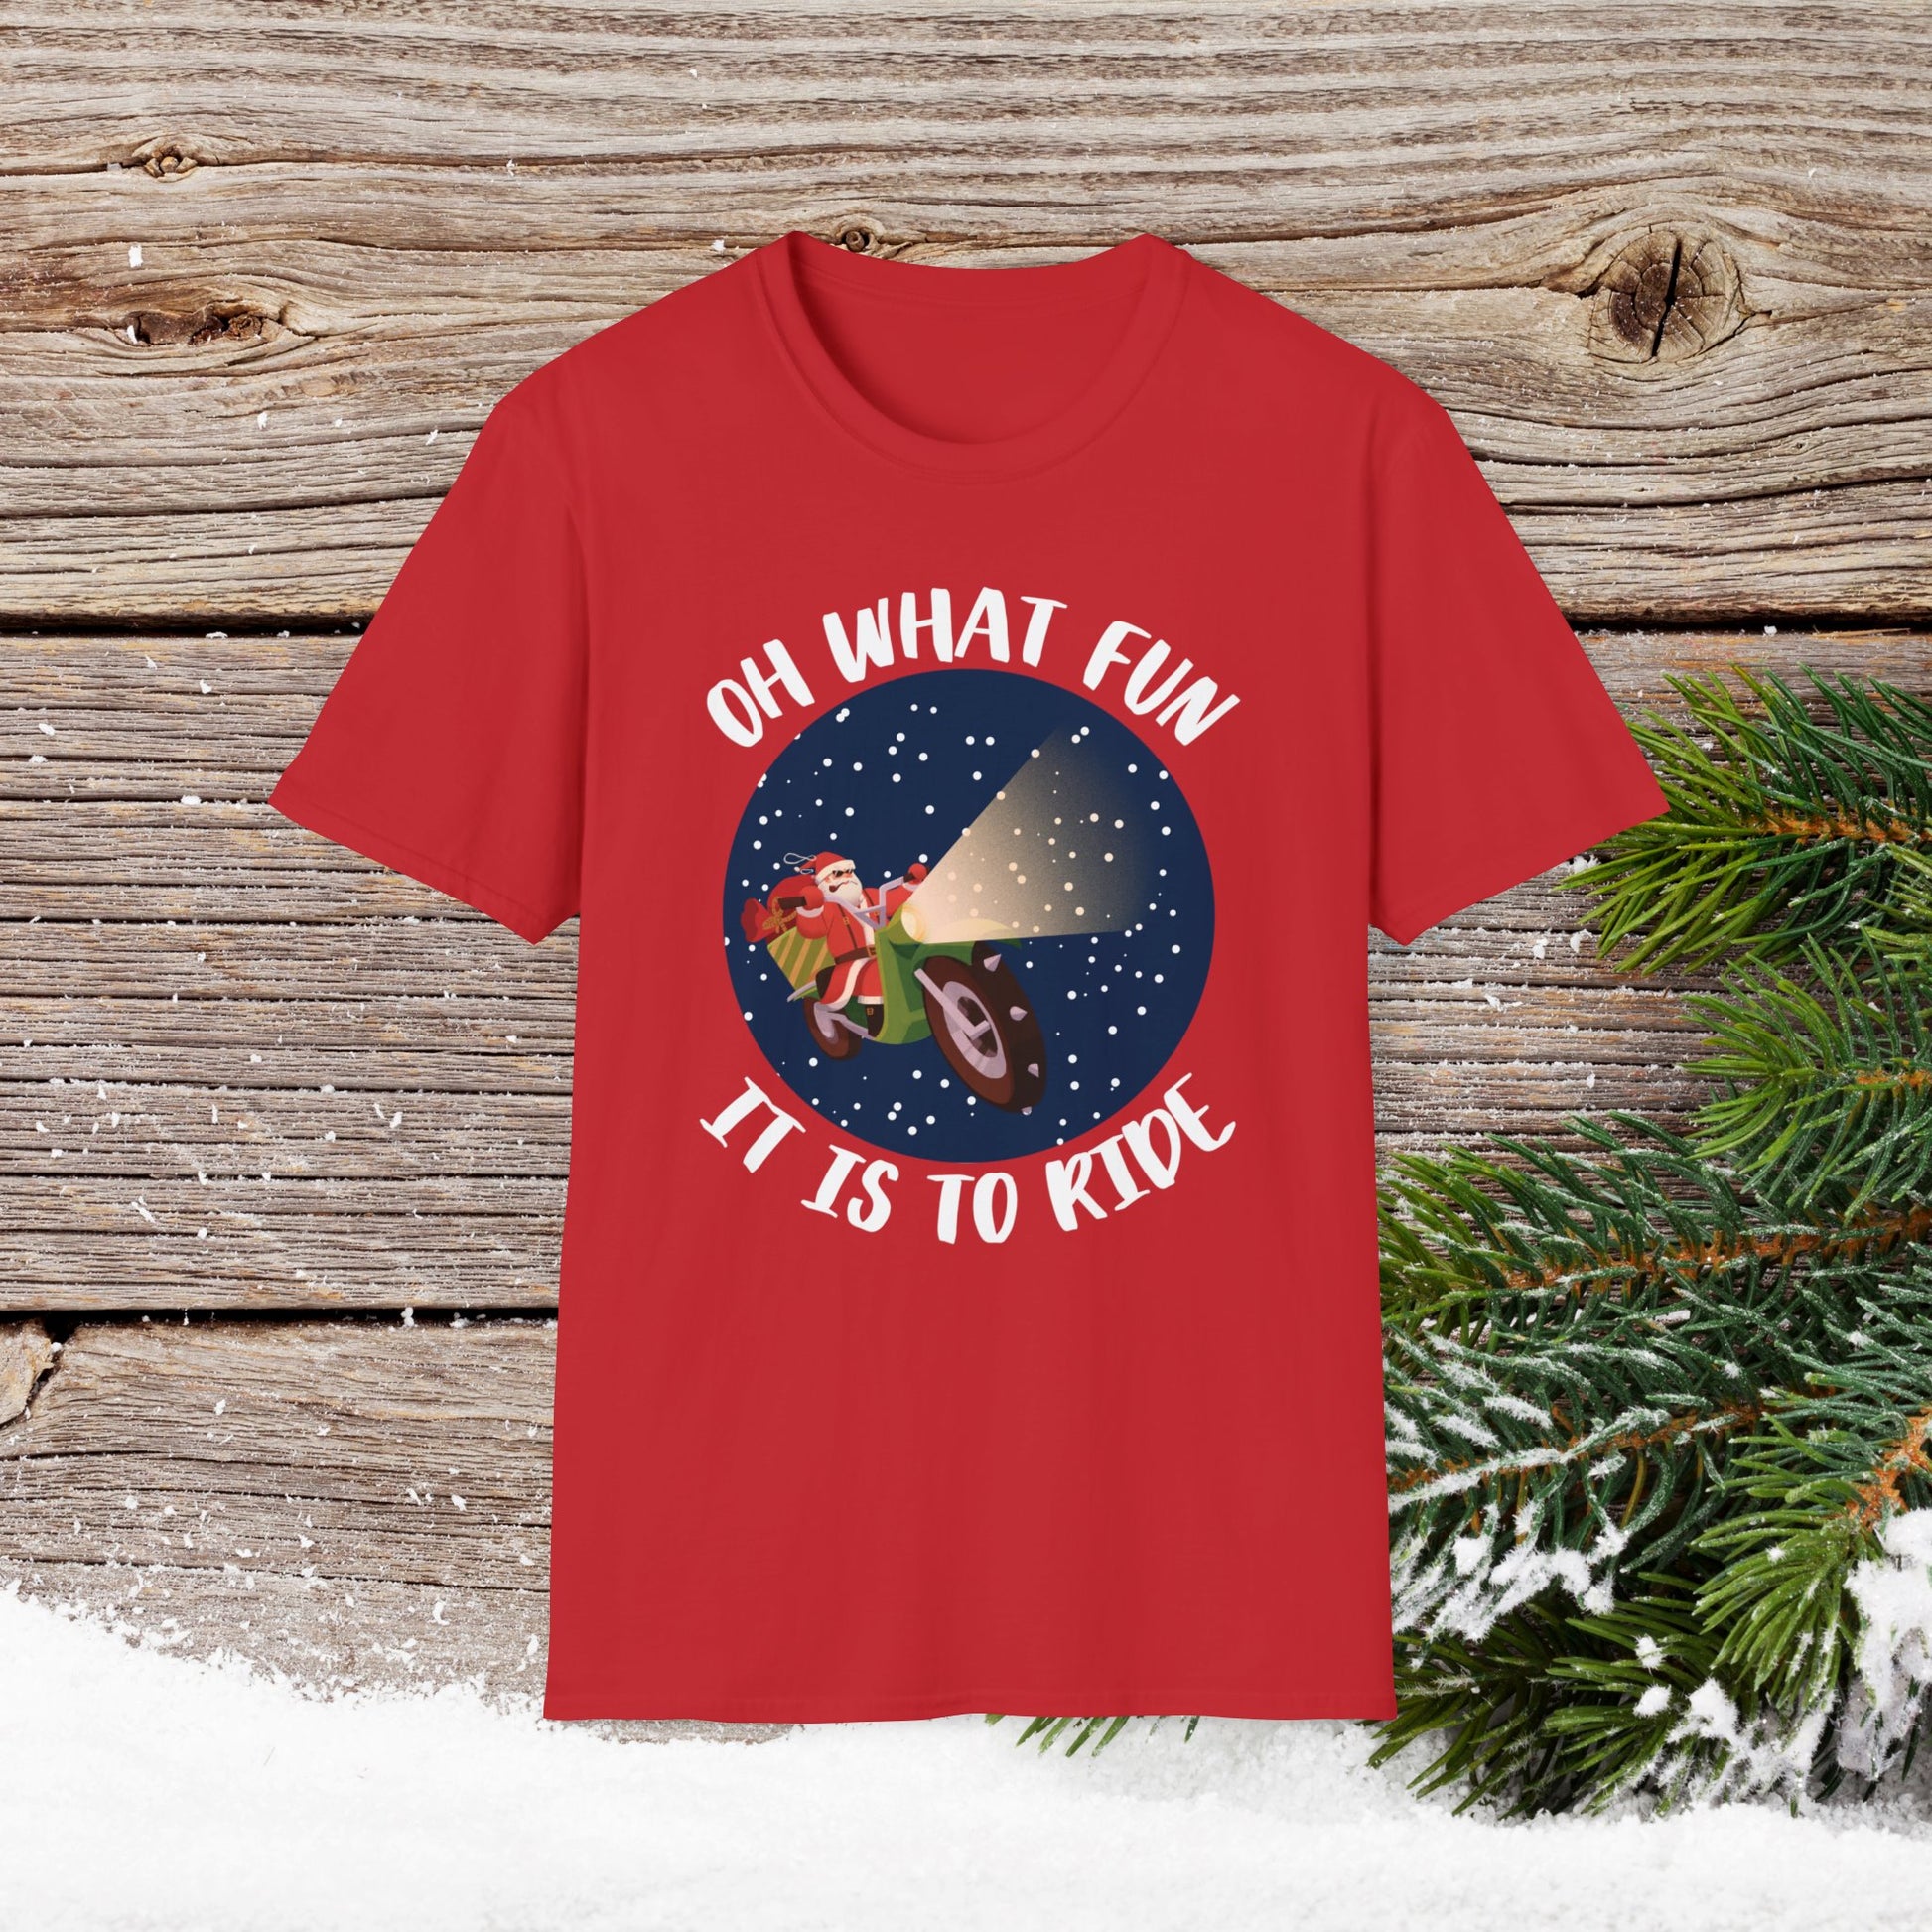 Christmas T-Shirt - Oh What Fun It Is To Ride - Mens anc Boys Christmas Shirts - Youth and Adult Christmas TShirts T-Shirts Graphic Avenue Red Adult Small 